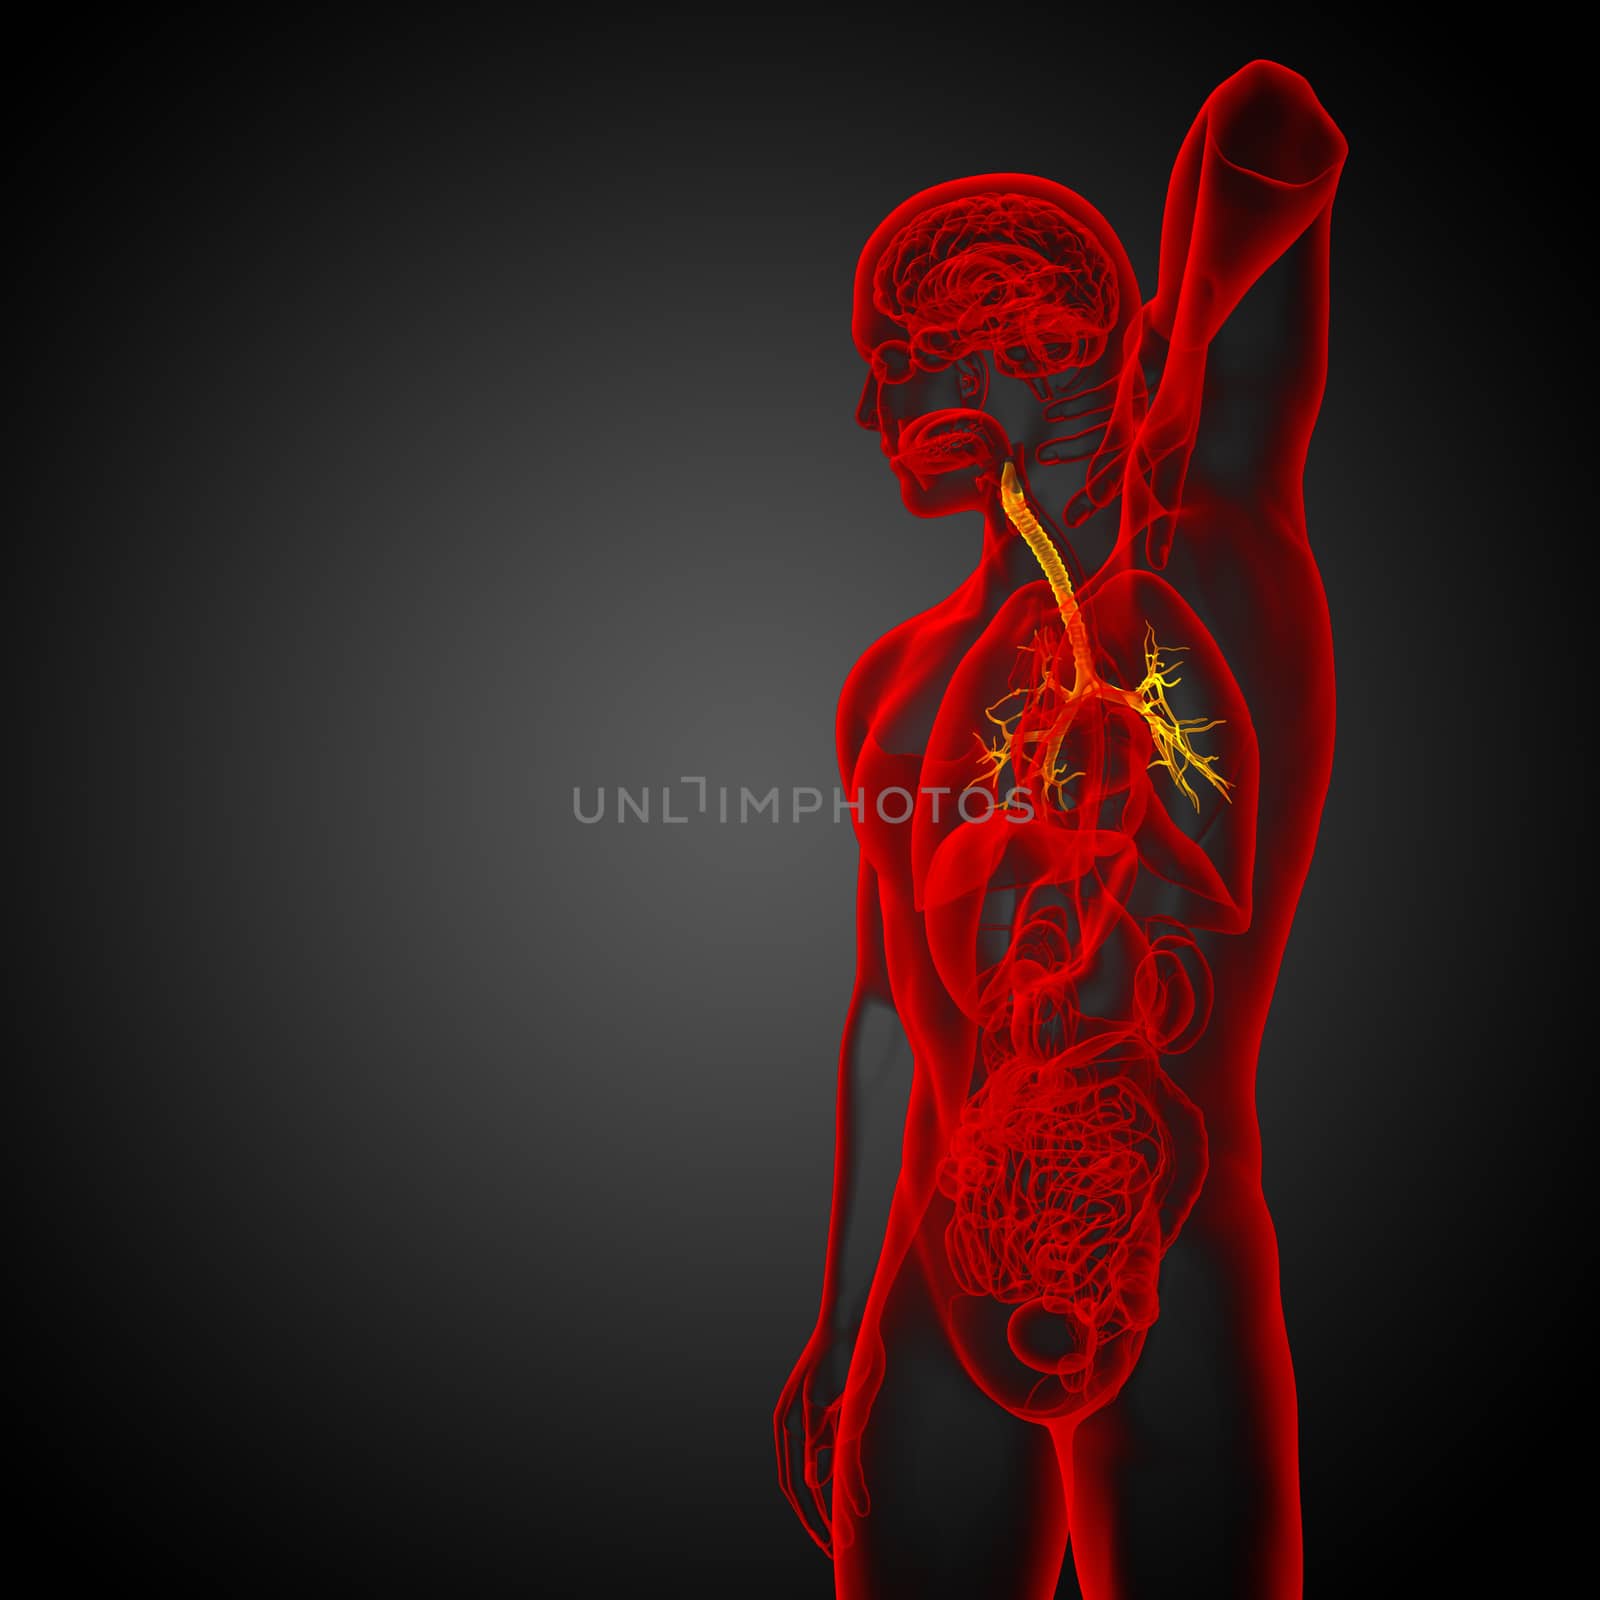 3D medical illustration of the male bronchi - side view